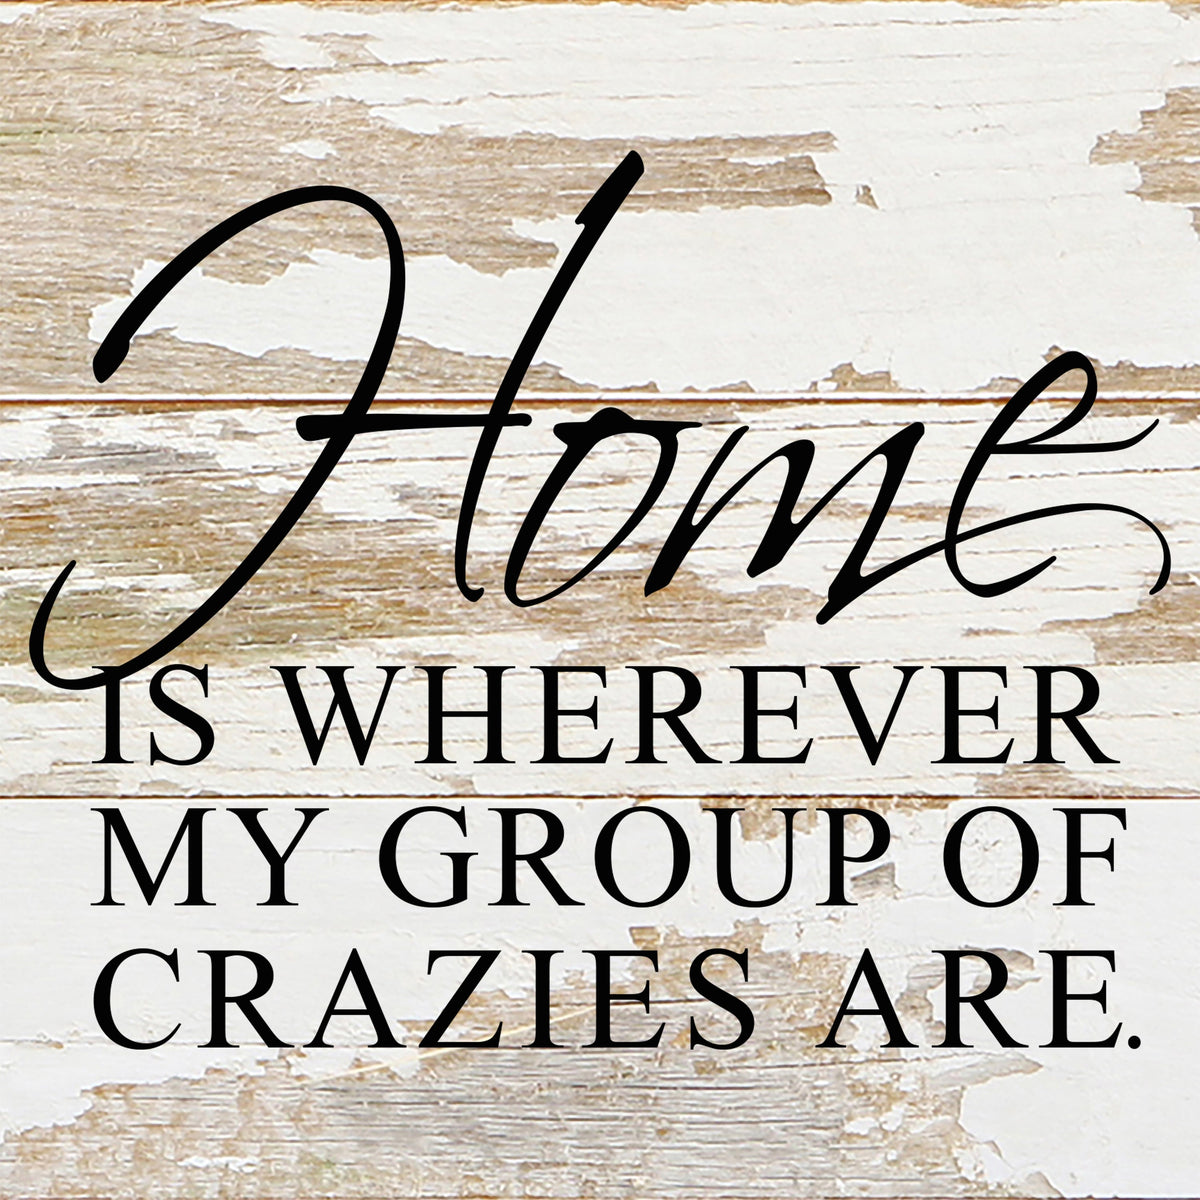 Home is wherever my group of crazies are. / 6"x6" Reclaimed Wood Sign